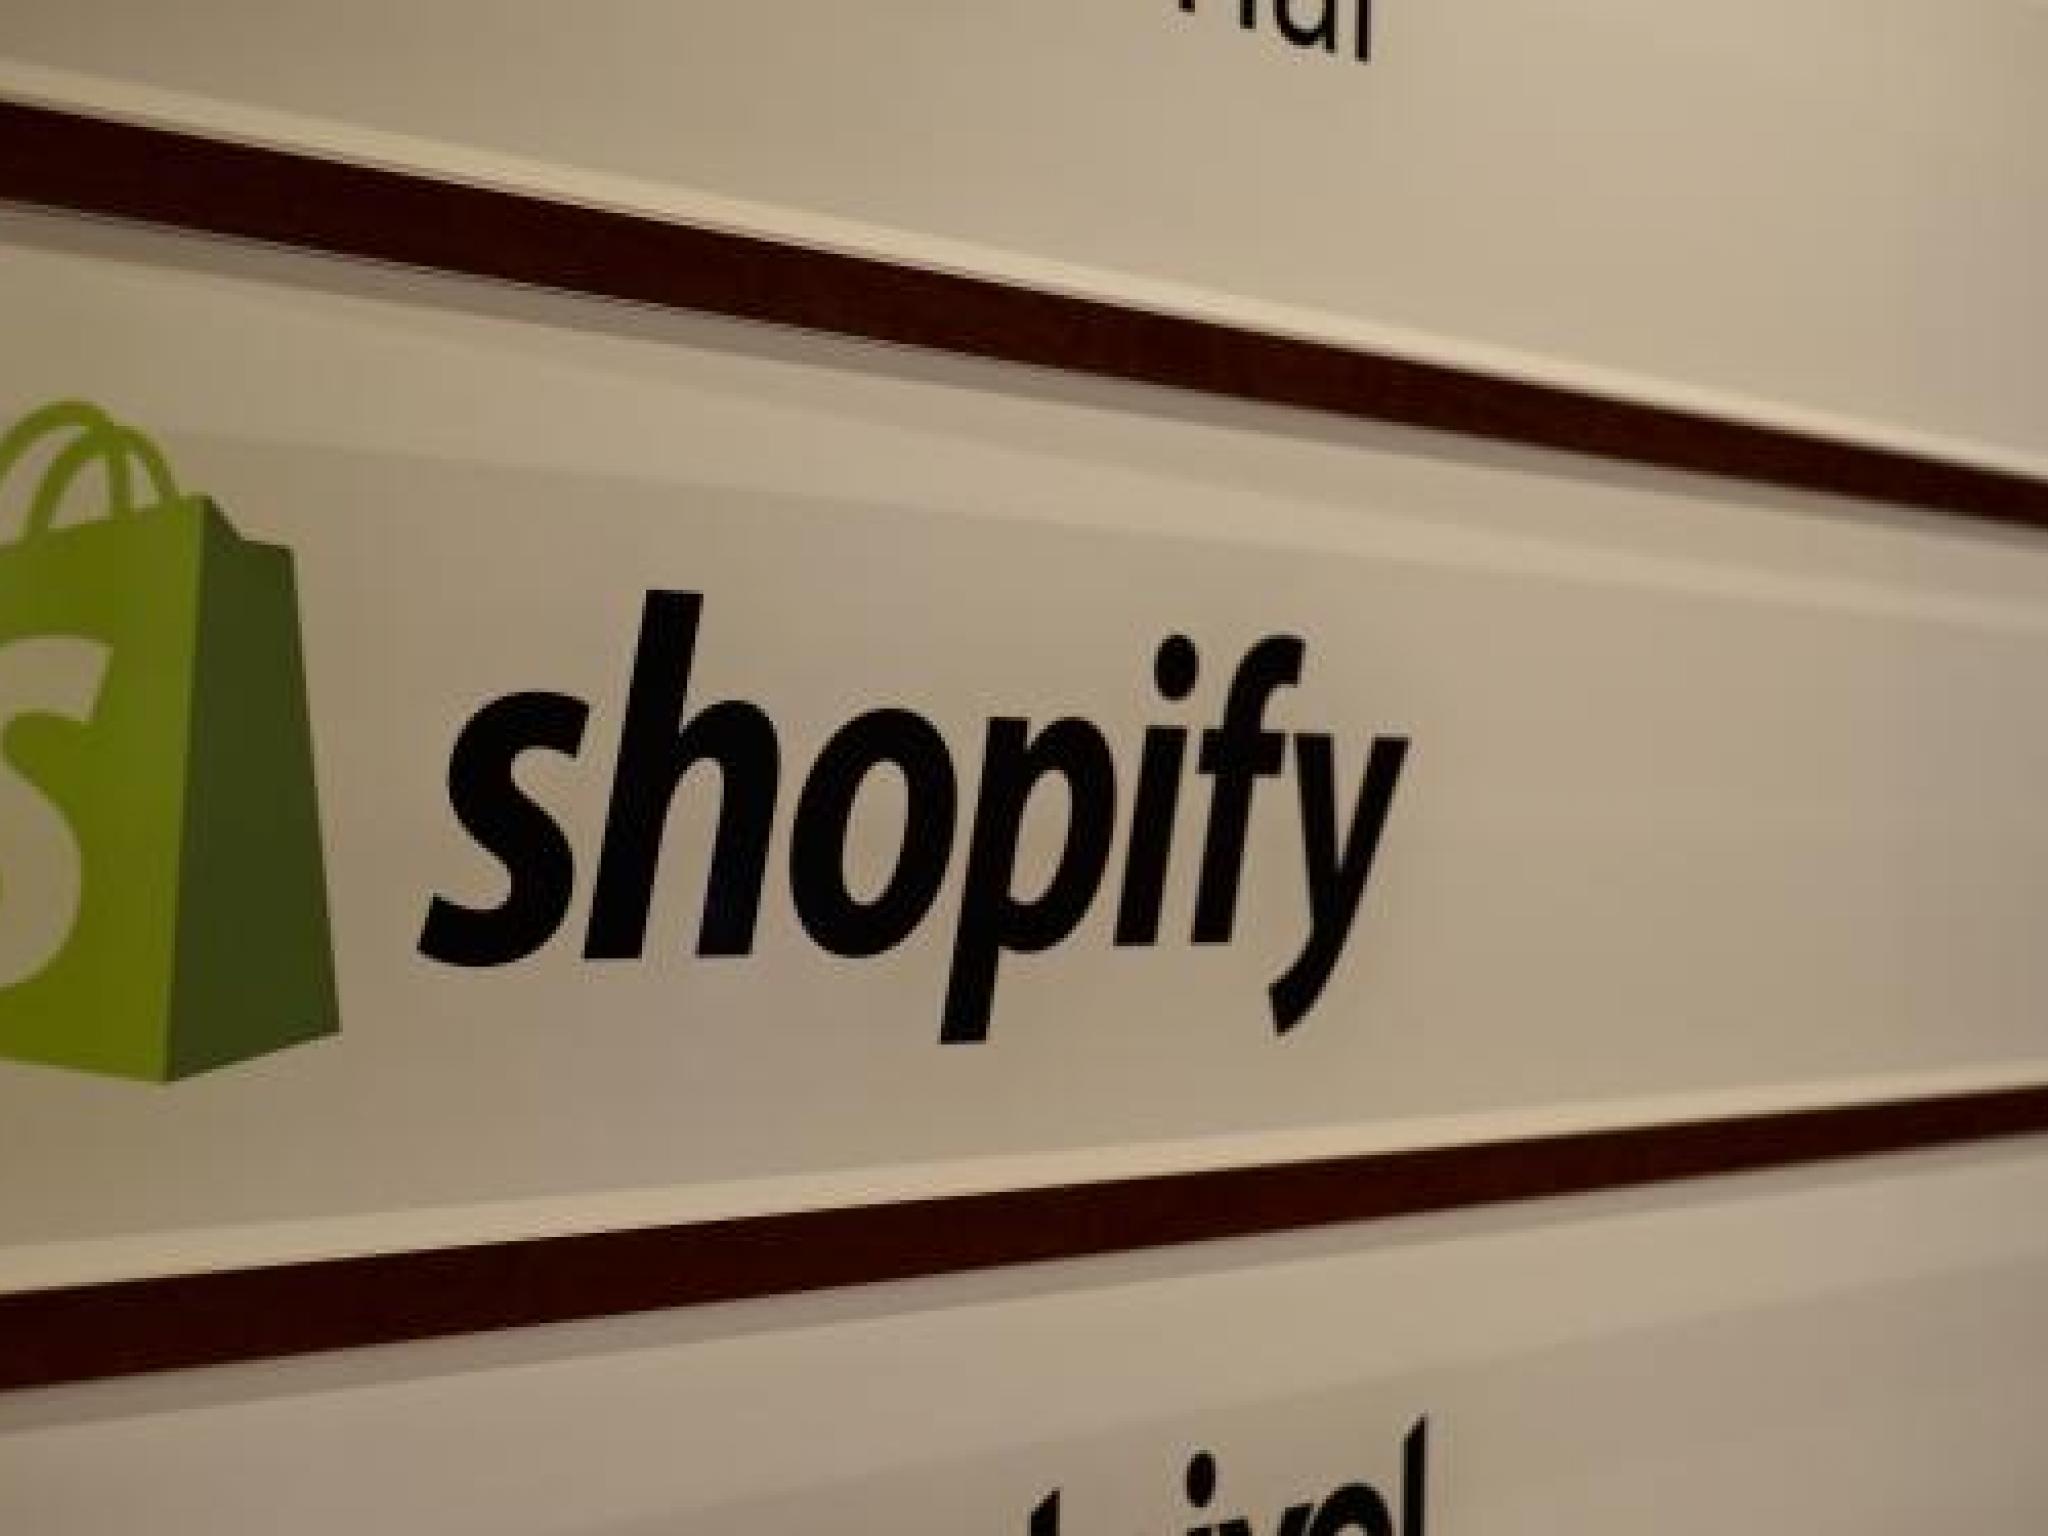  3-etfs-with-big-time-shopify-exposure 